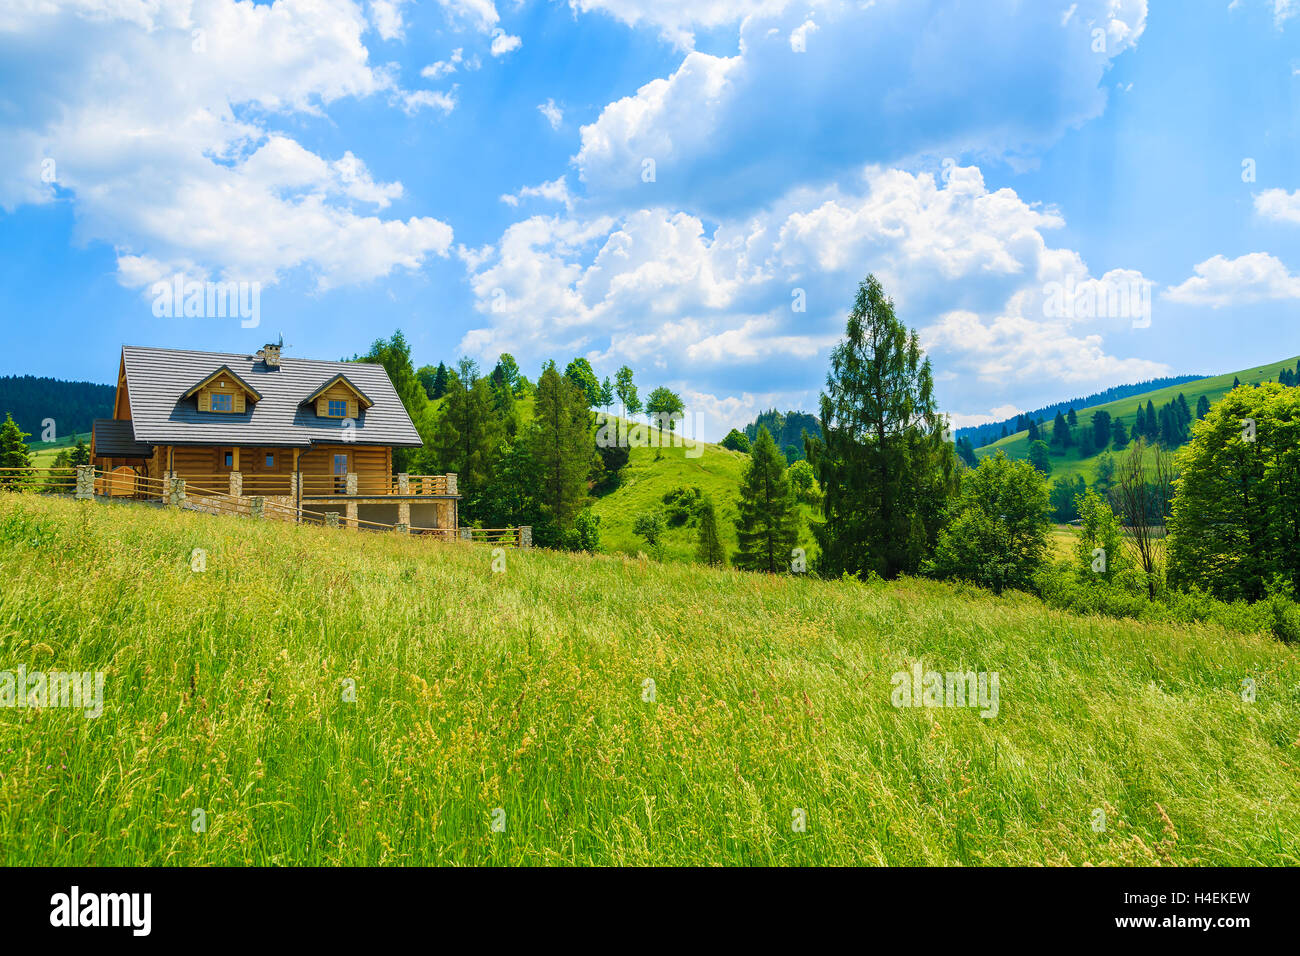 Traditional wooden mountain house on green field in summer, Szczawnica, Beskid Mountains, Poland Stock Photo